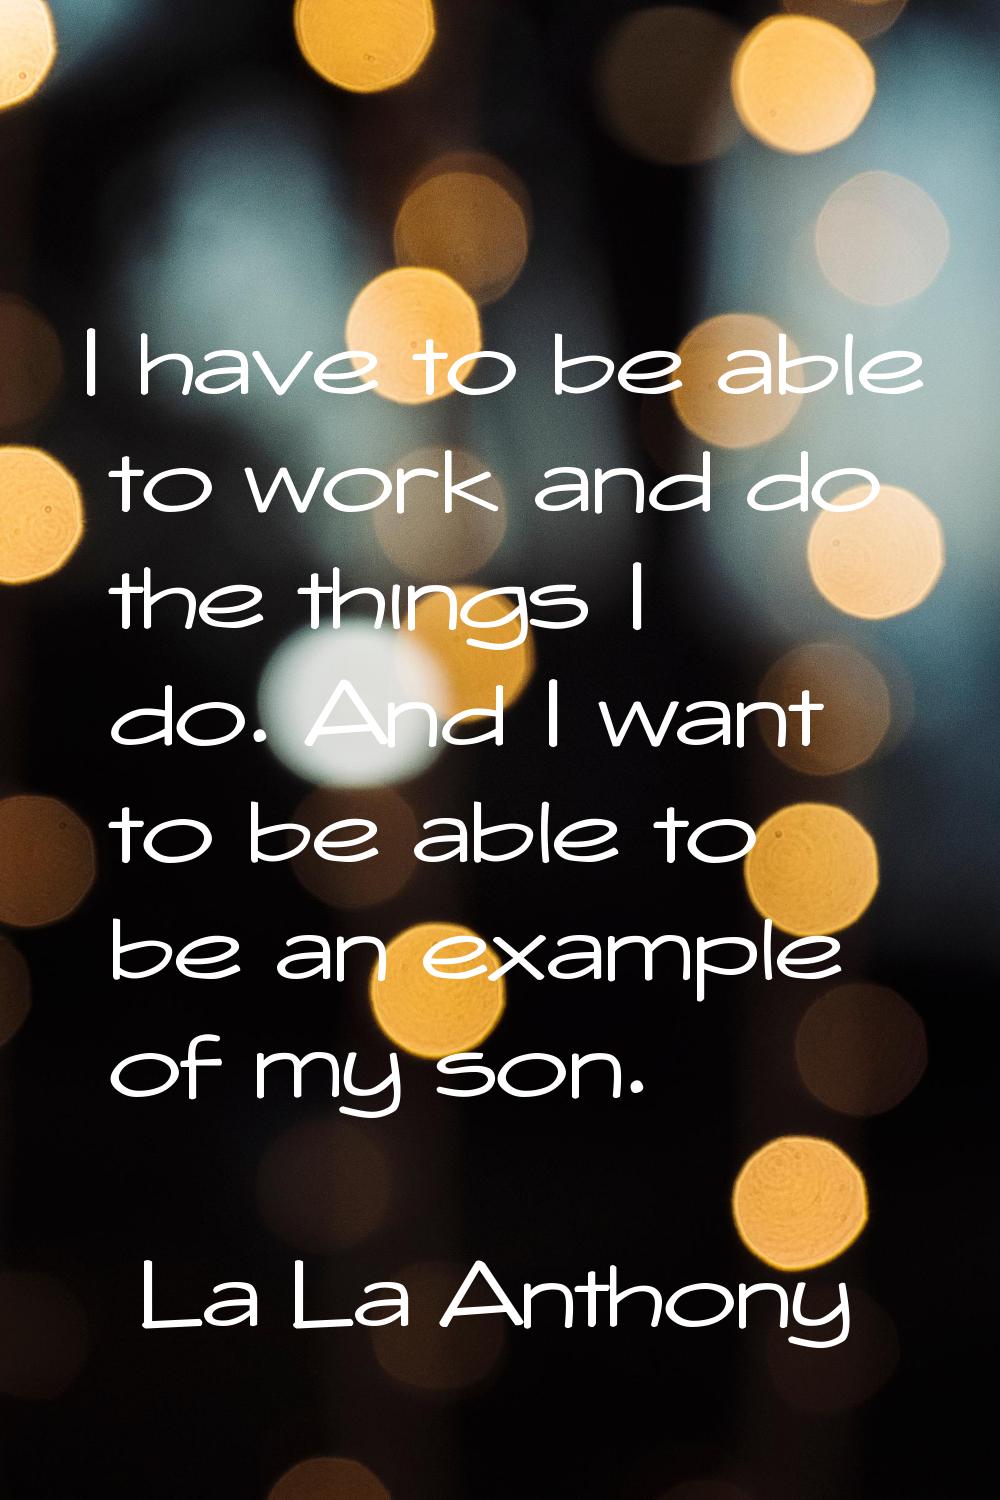 I have to be able to work and do the things I do. And I want to be able to be an example of my son.